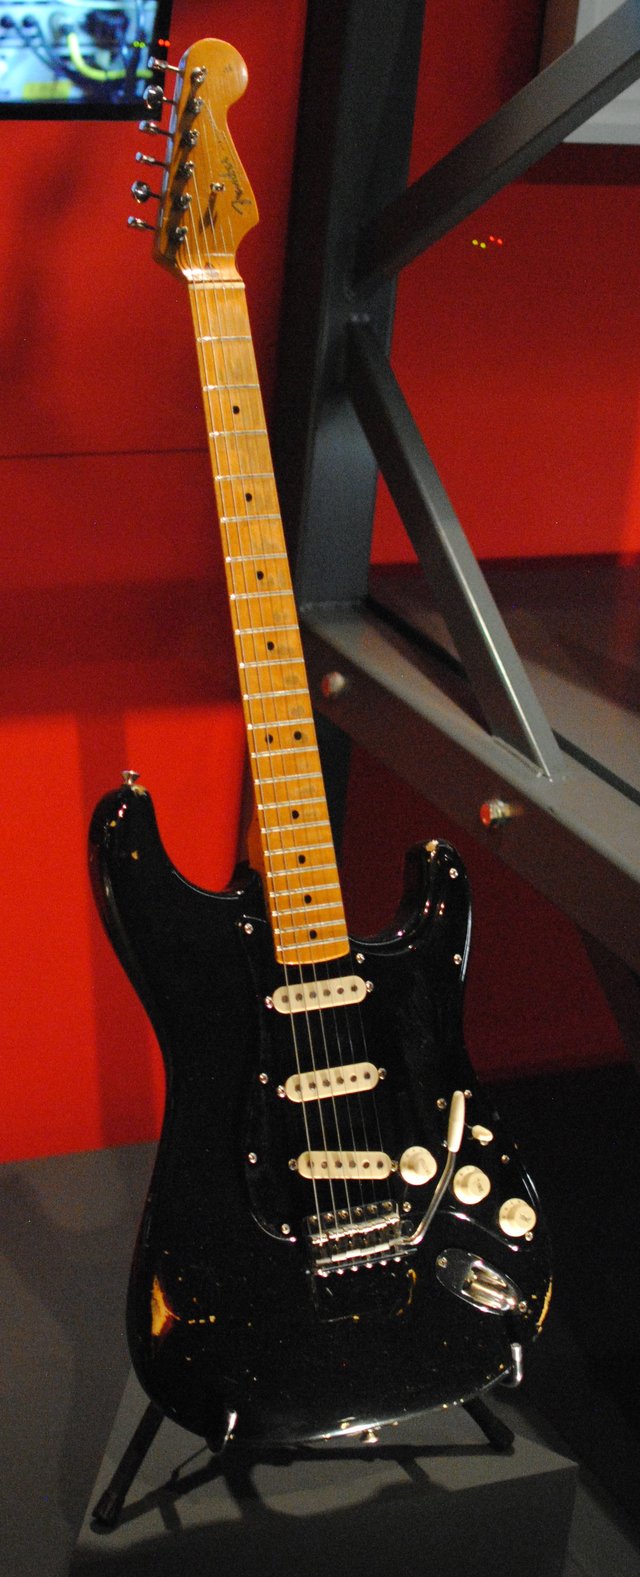 Gilmour's "Black Strat" on display at the Pink Floyd: Their Mortal Remains exhibition. It was auctioned for charity in 2019 for $3.9 million, making it the most expensive guitar ever sold at auction.